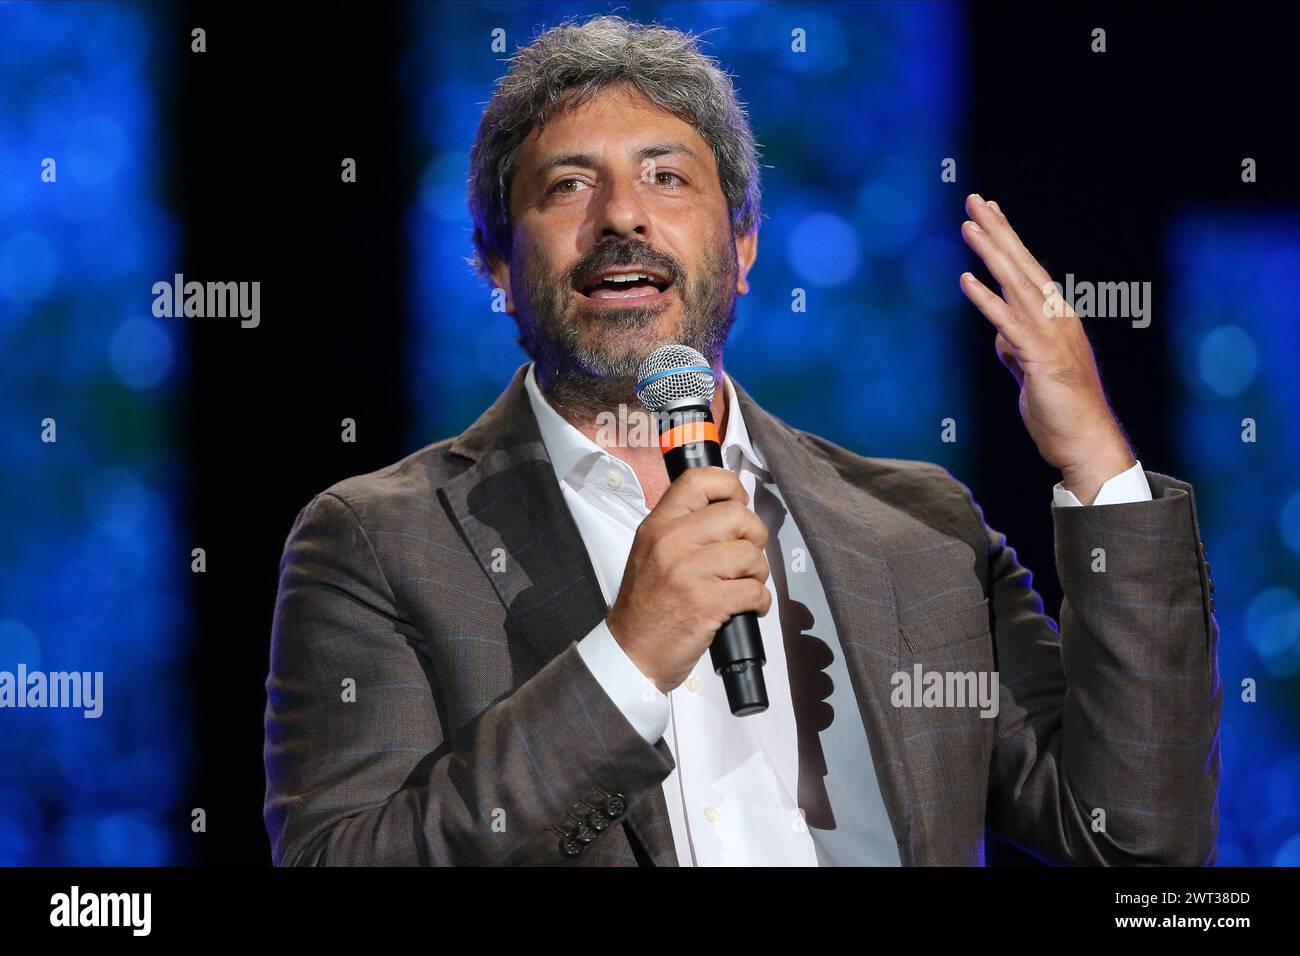 The President of the Italian Chamber, Roberto Fico, during the Italy 5-Star event. Stock Photo